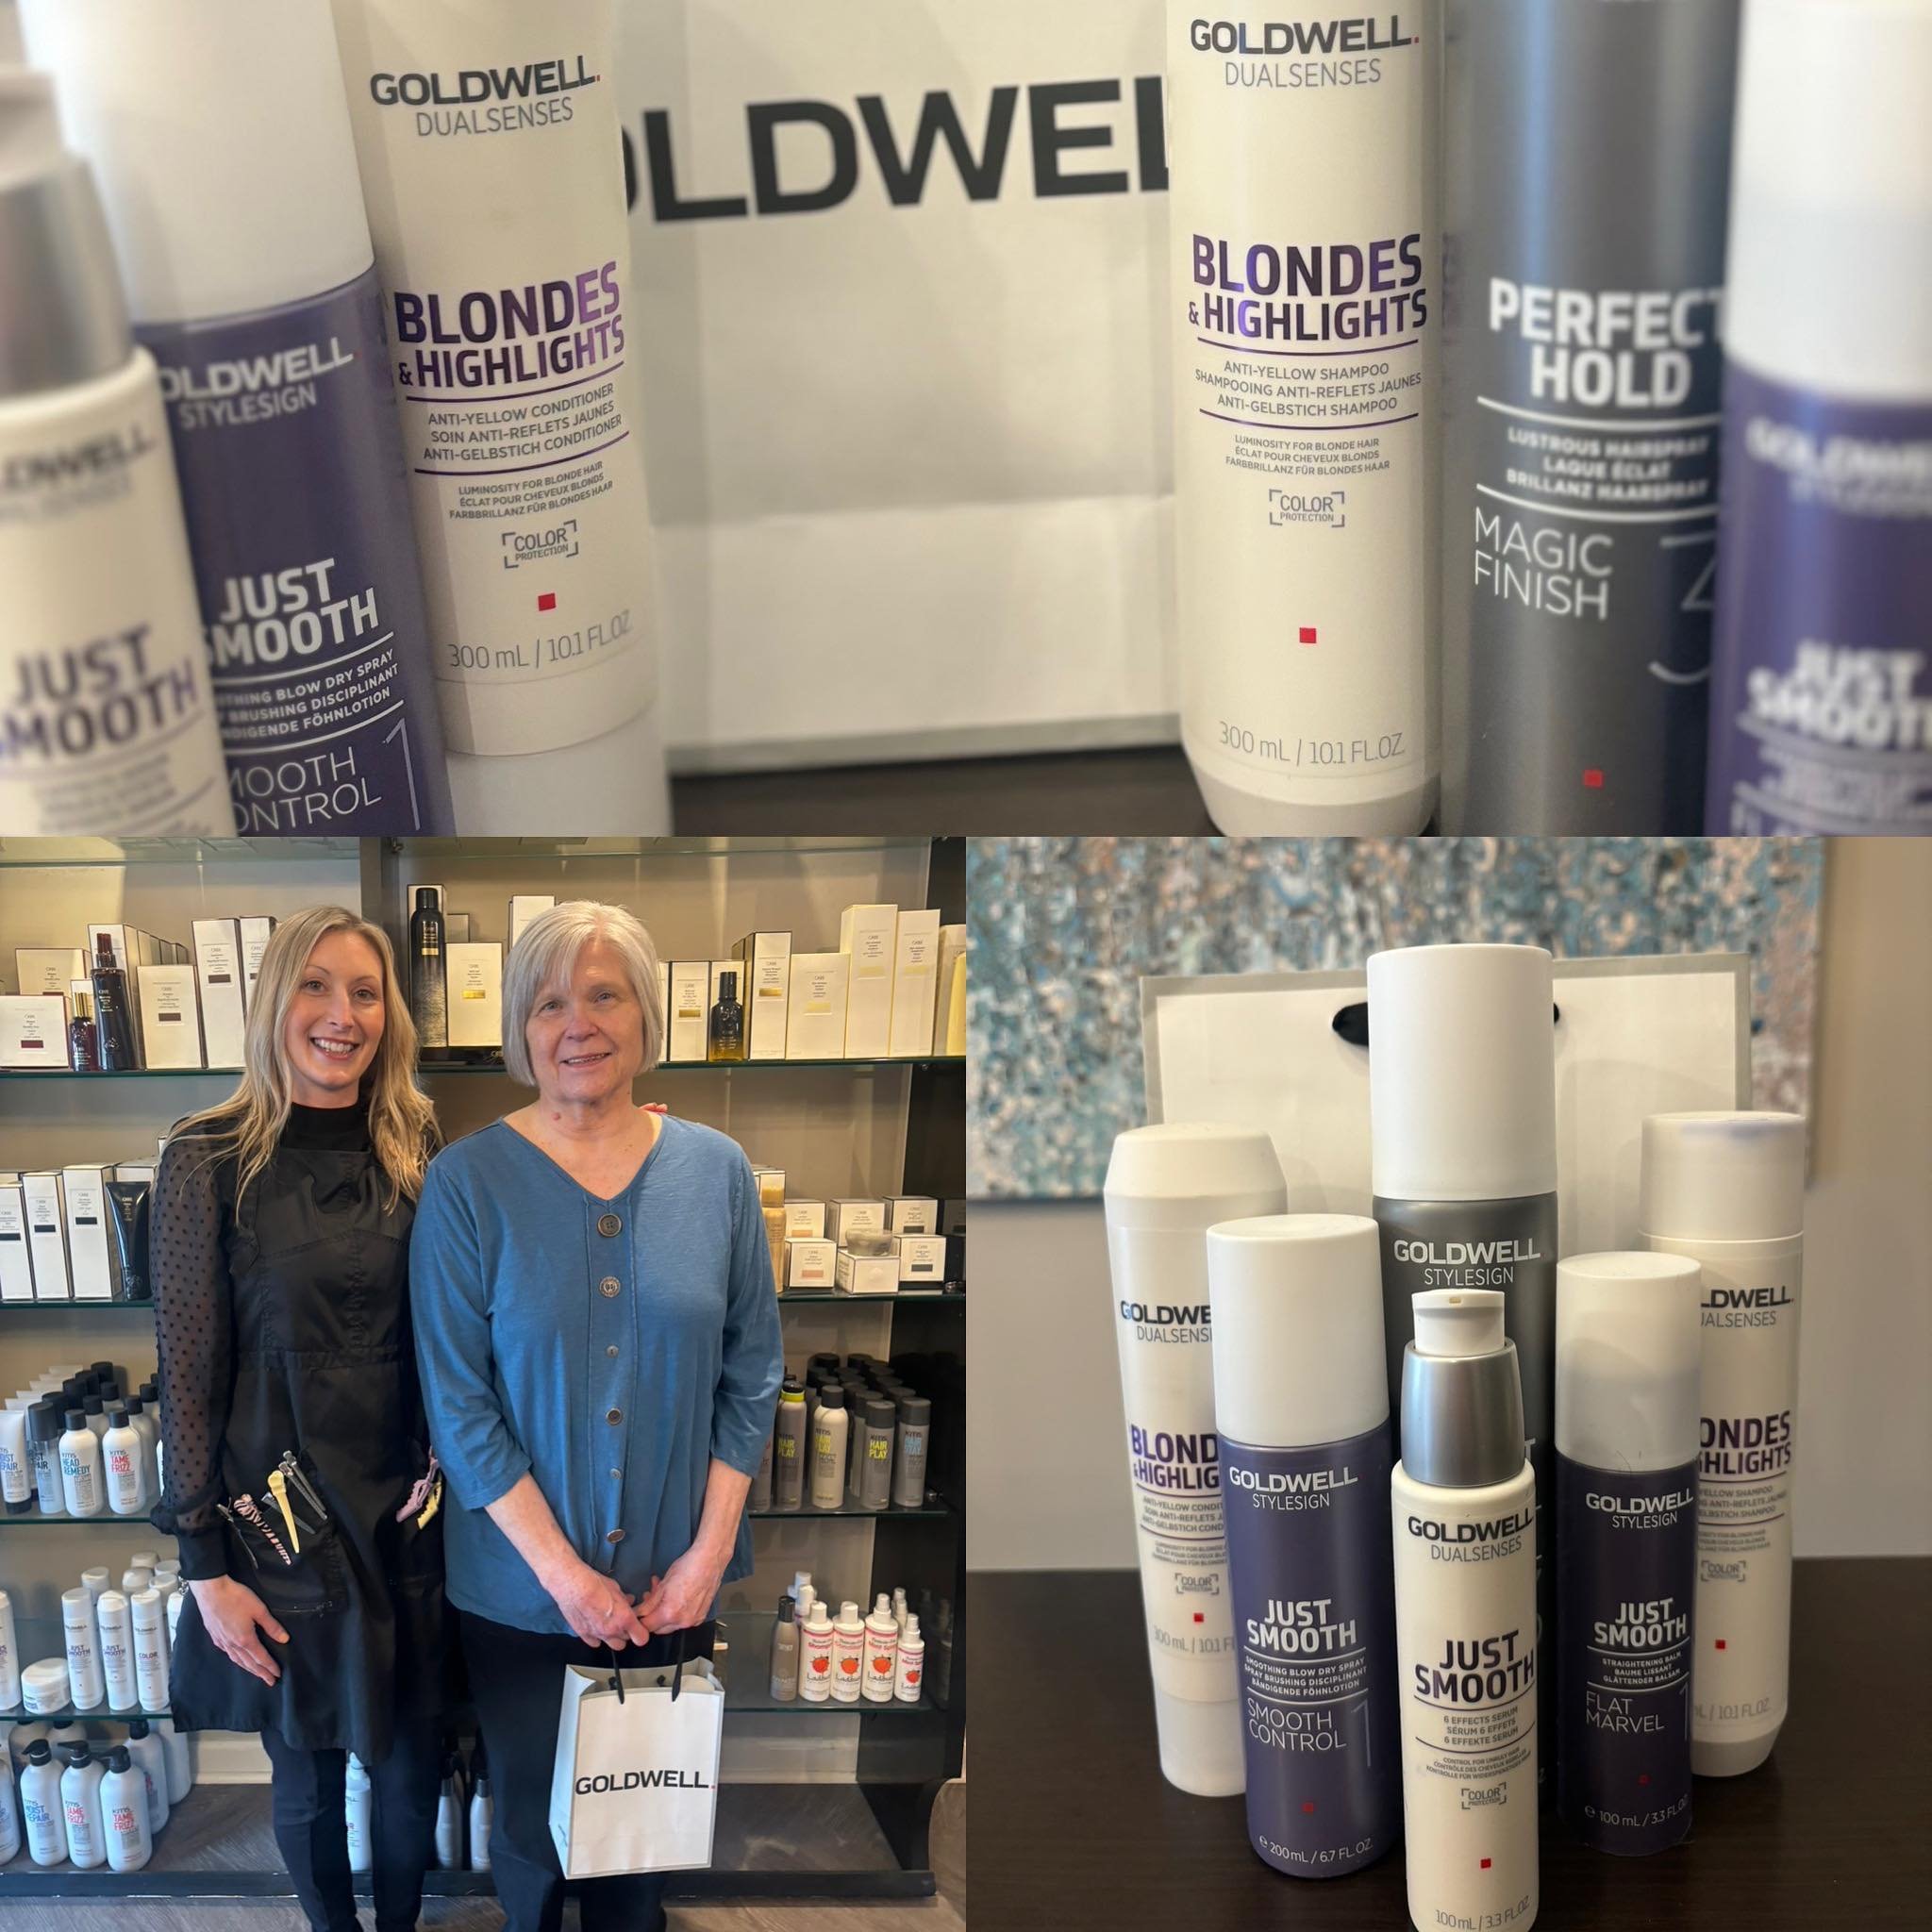 Carol Lynn&rsquo;s client, Jean, was the lucky winner of our Winter Special contest. She was entered by purchasing two products during the month of February and today she took home her prize of $120 worth of GOLDWELL products! 

Congratulations Jean!